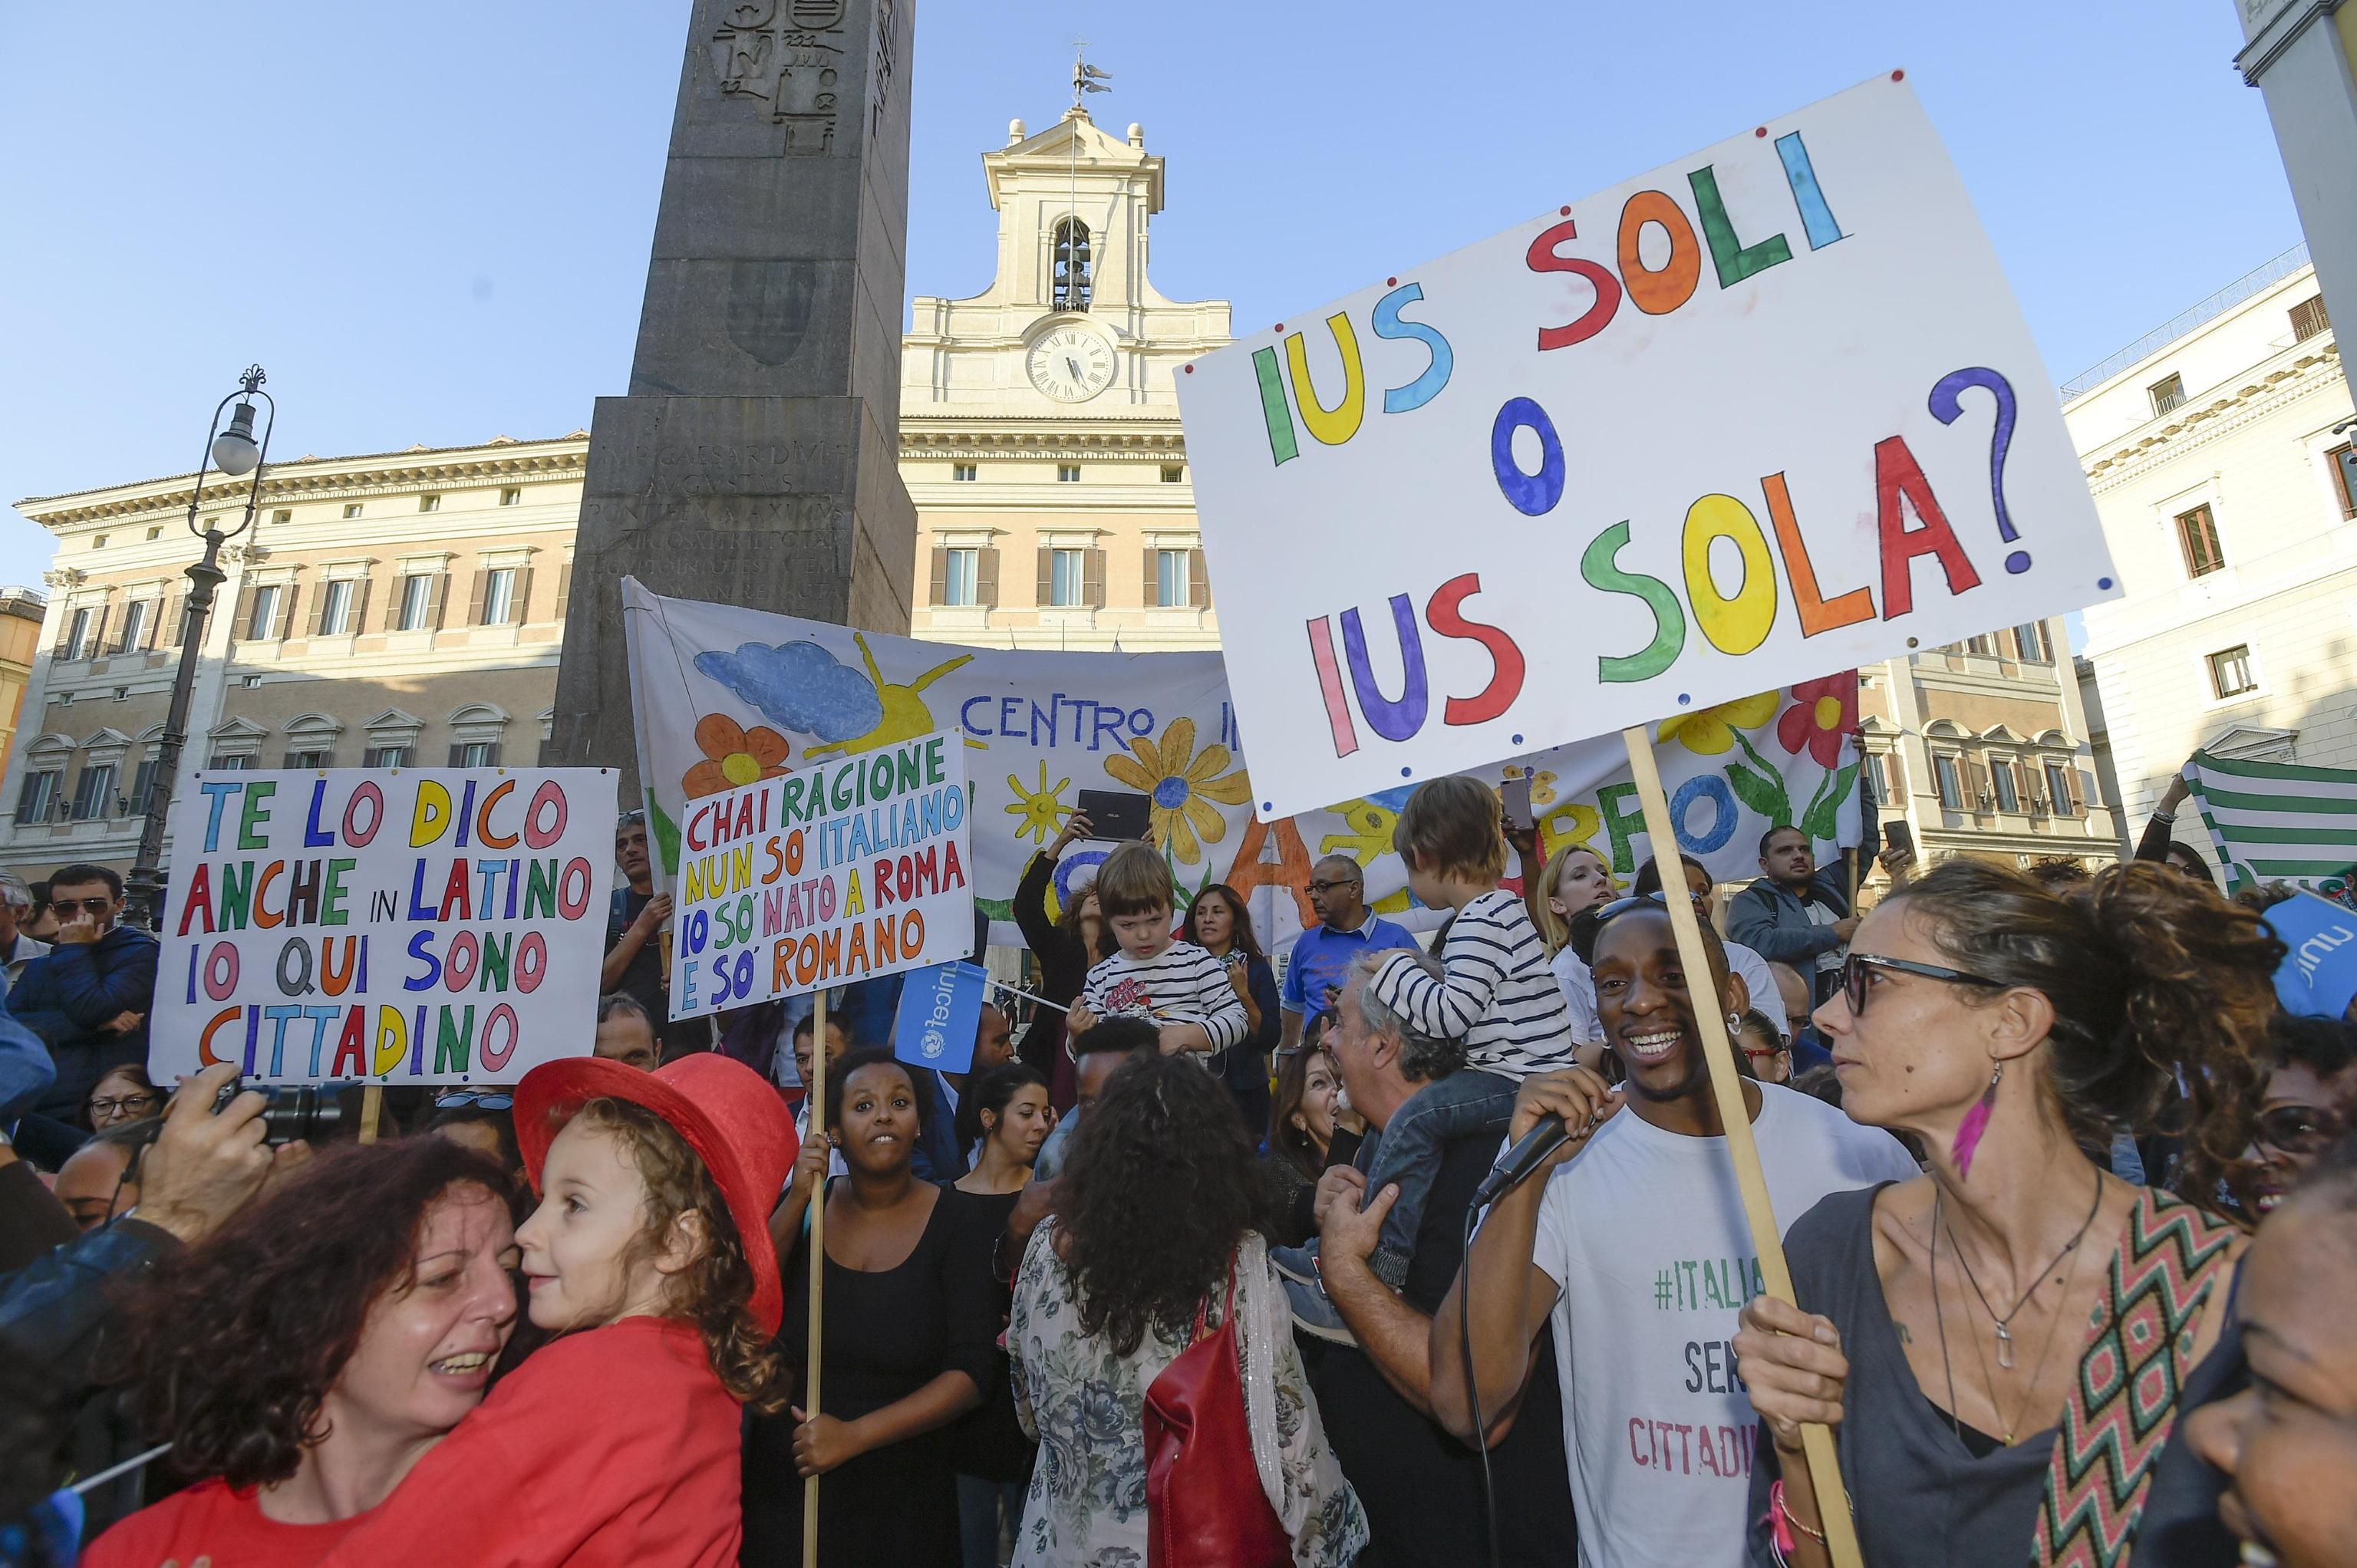 A moment of the demonstration to ask for the 'Ius soli', in Rome, 13 October 2017. Ius Soli (meaning 